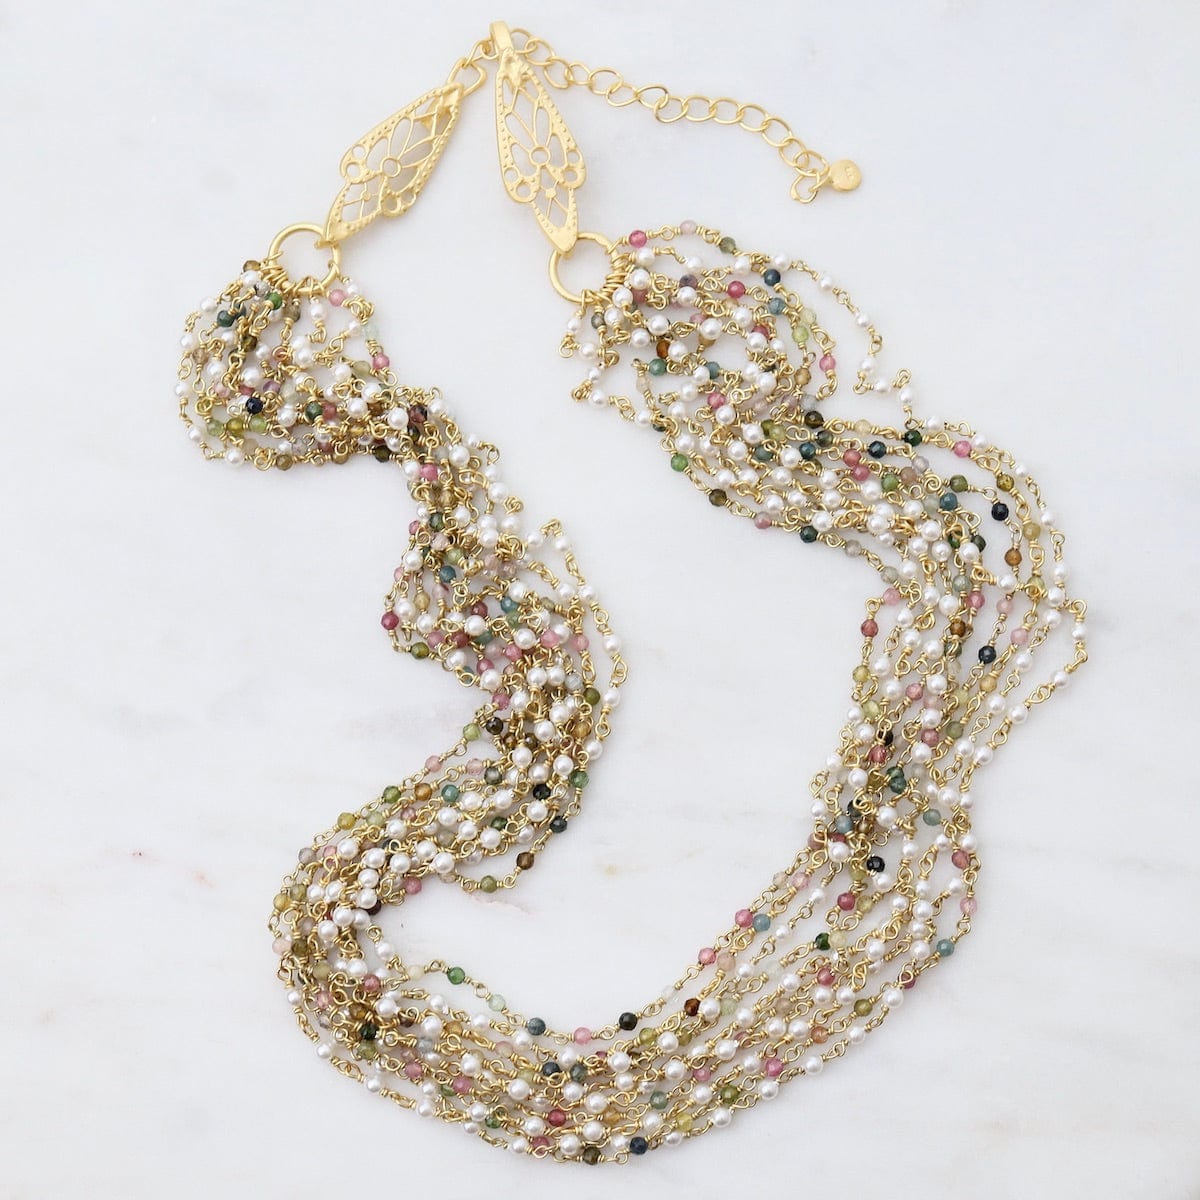 NKL-GPL Ten Strings of Pearl and Multi Tourmaline Necklace